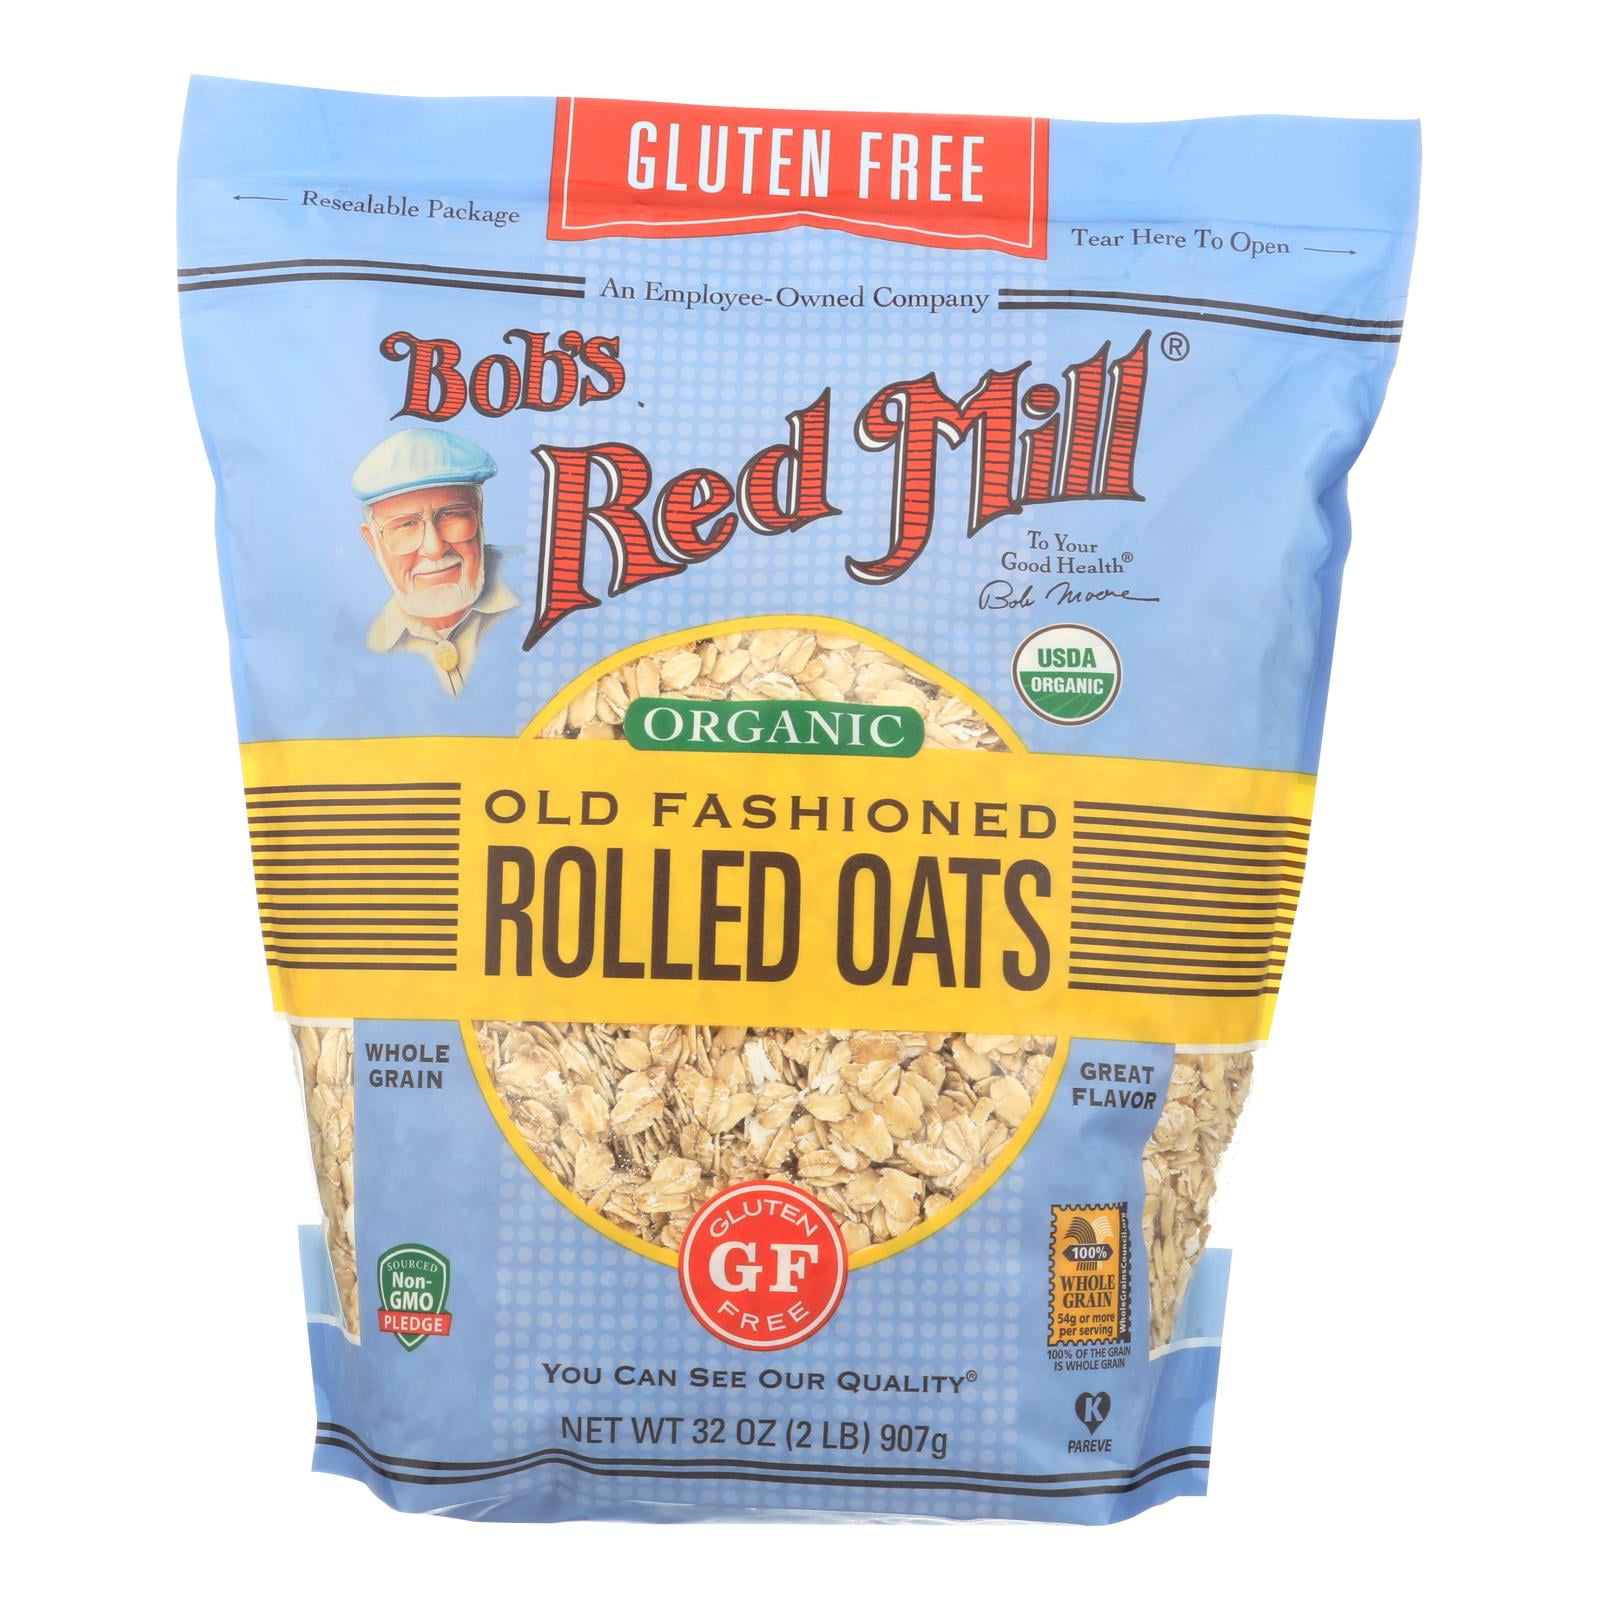 Bob's Red Mill Organic Old Fashioned Rolled Oats Gluten Free 32 OZ ...